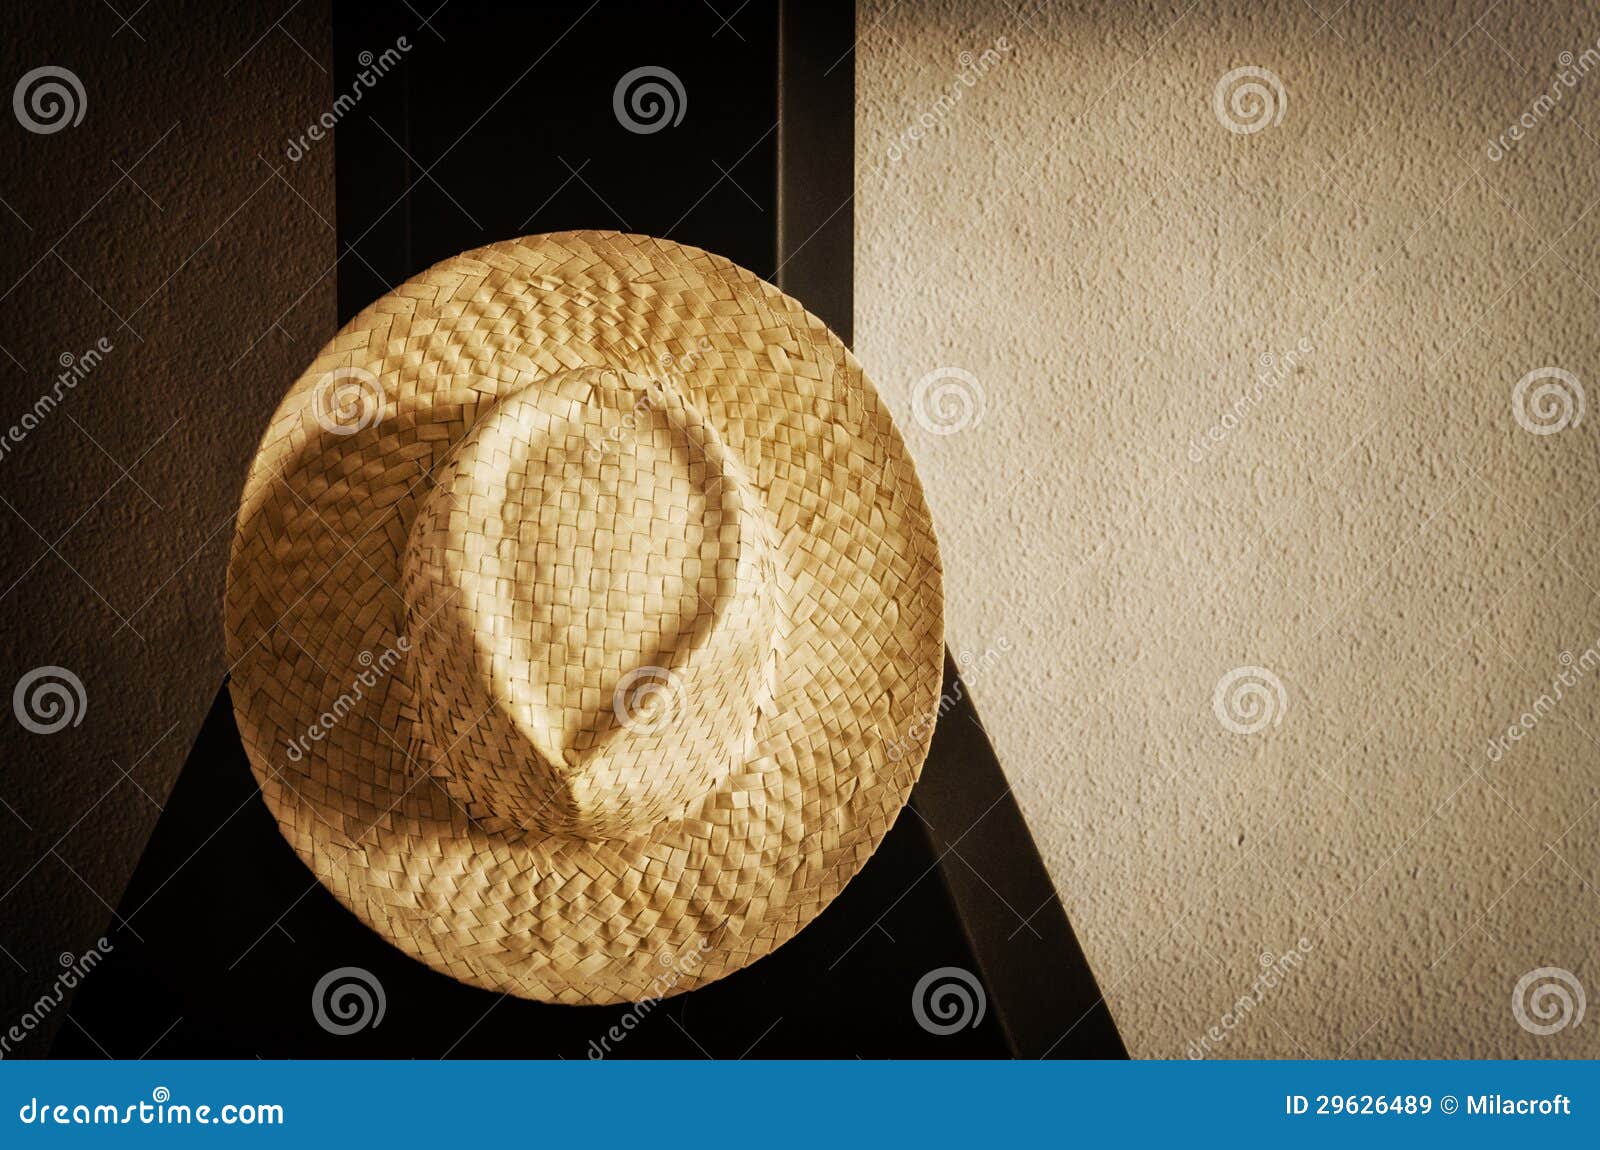 Farmer s hat stock image. Image of texture, accessories - 29626489